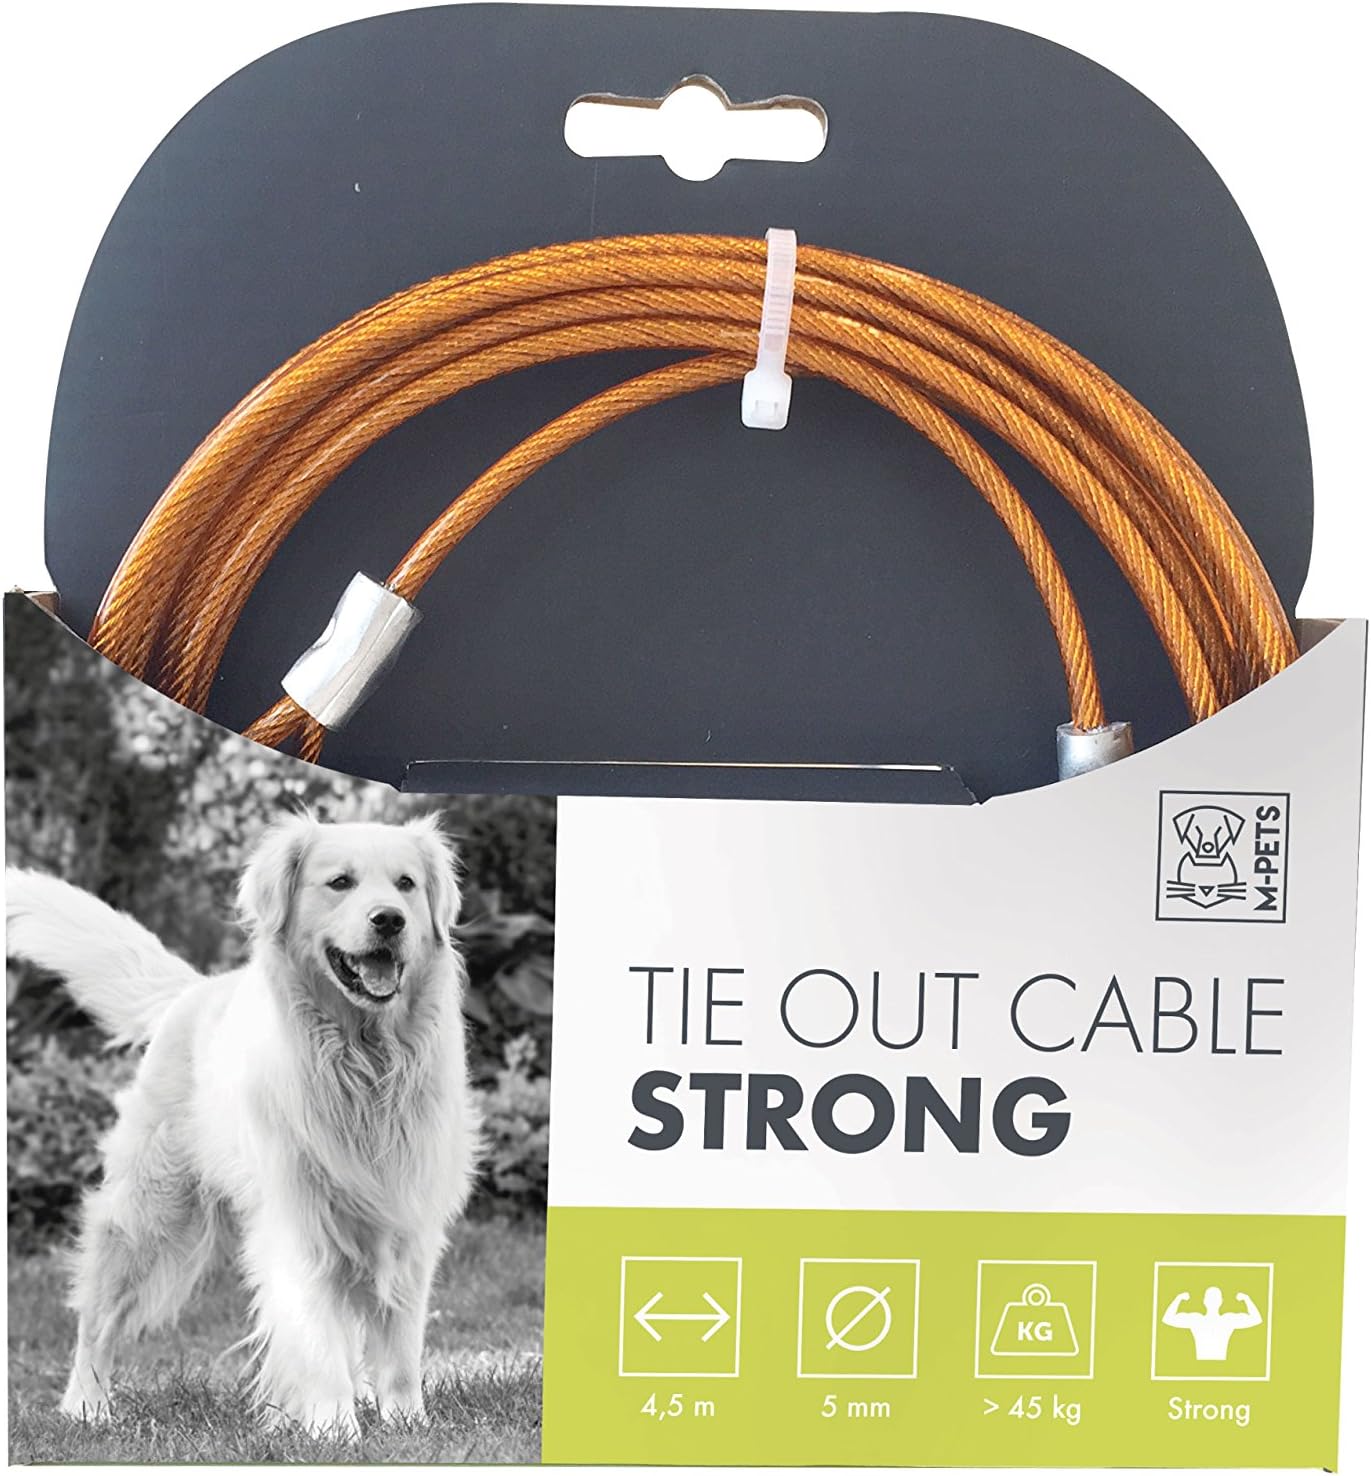 M-PETS Tie Out Cable Strong 4.5m